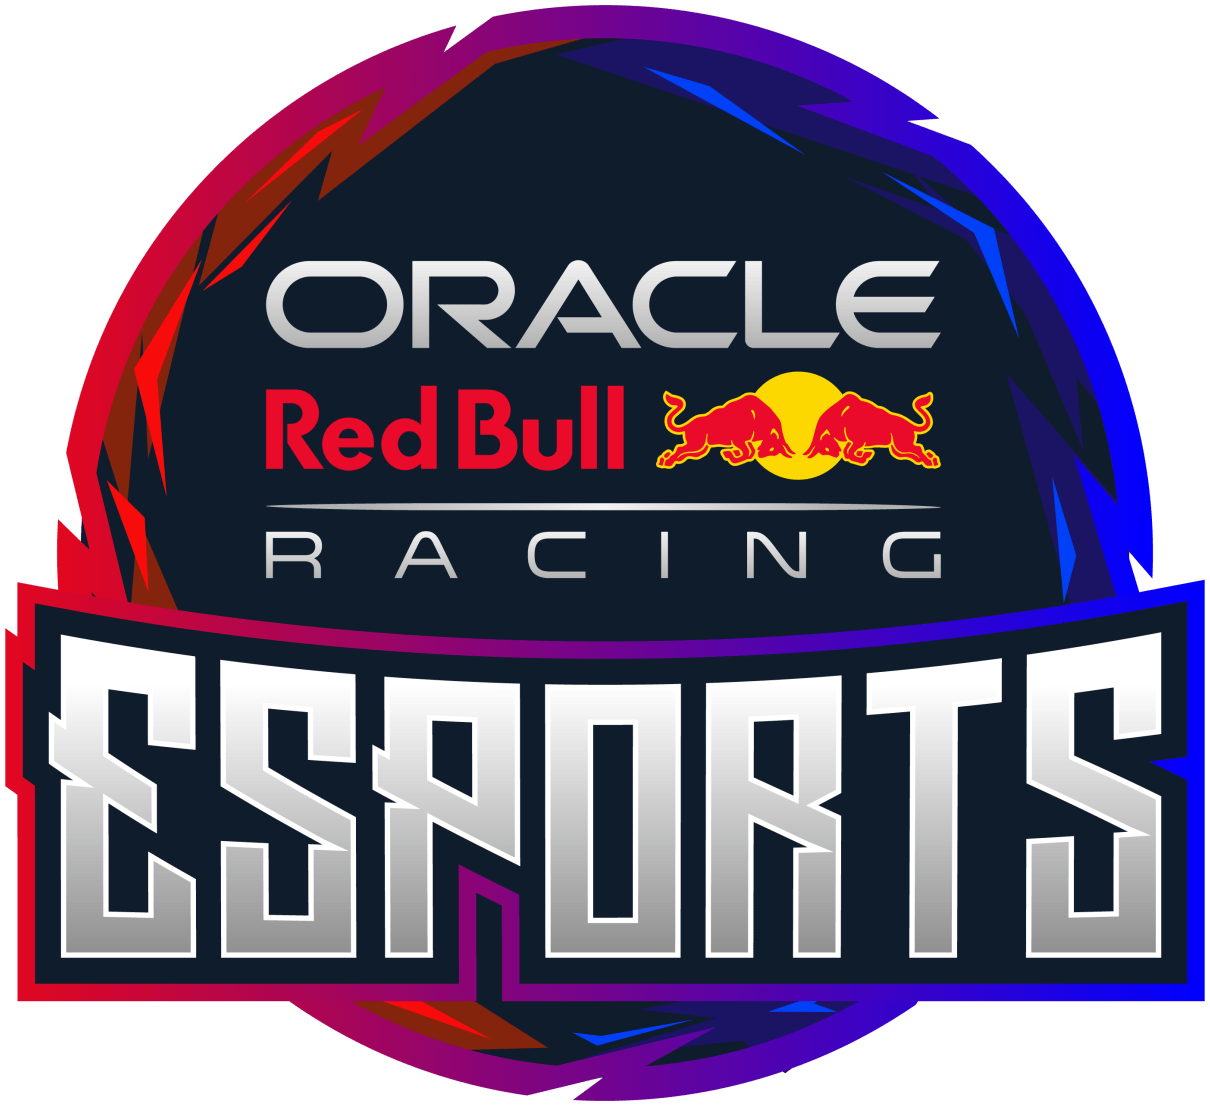 Oracle Red Bull Racing Esports